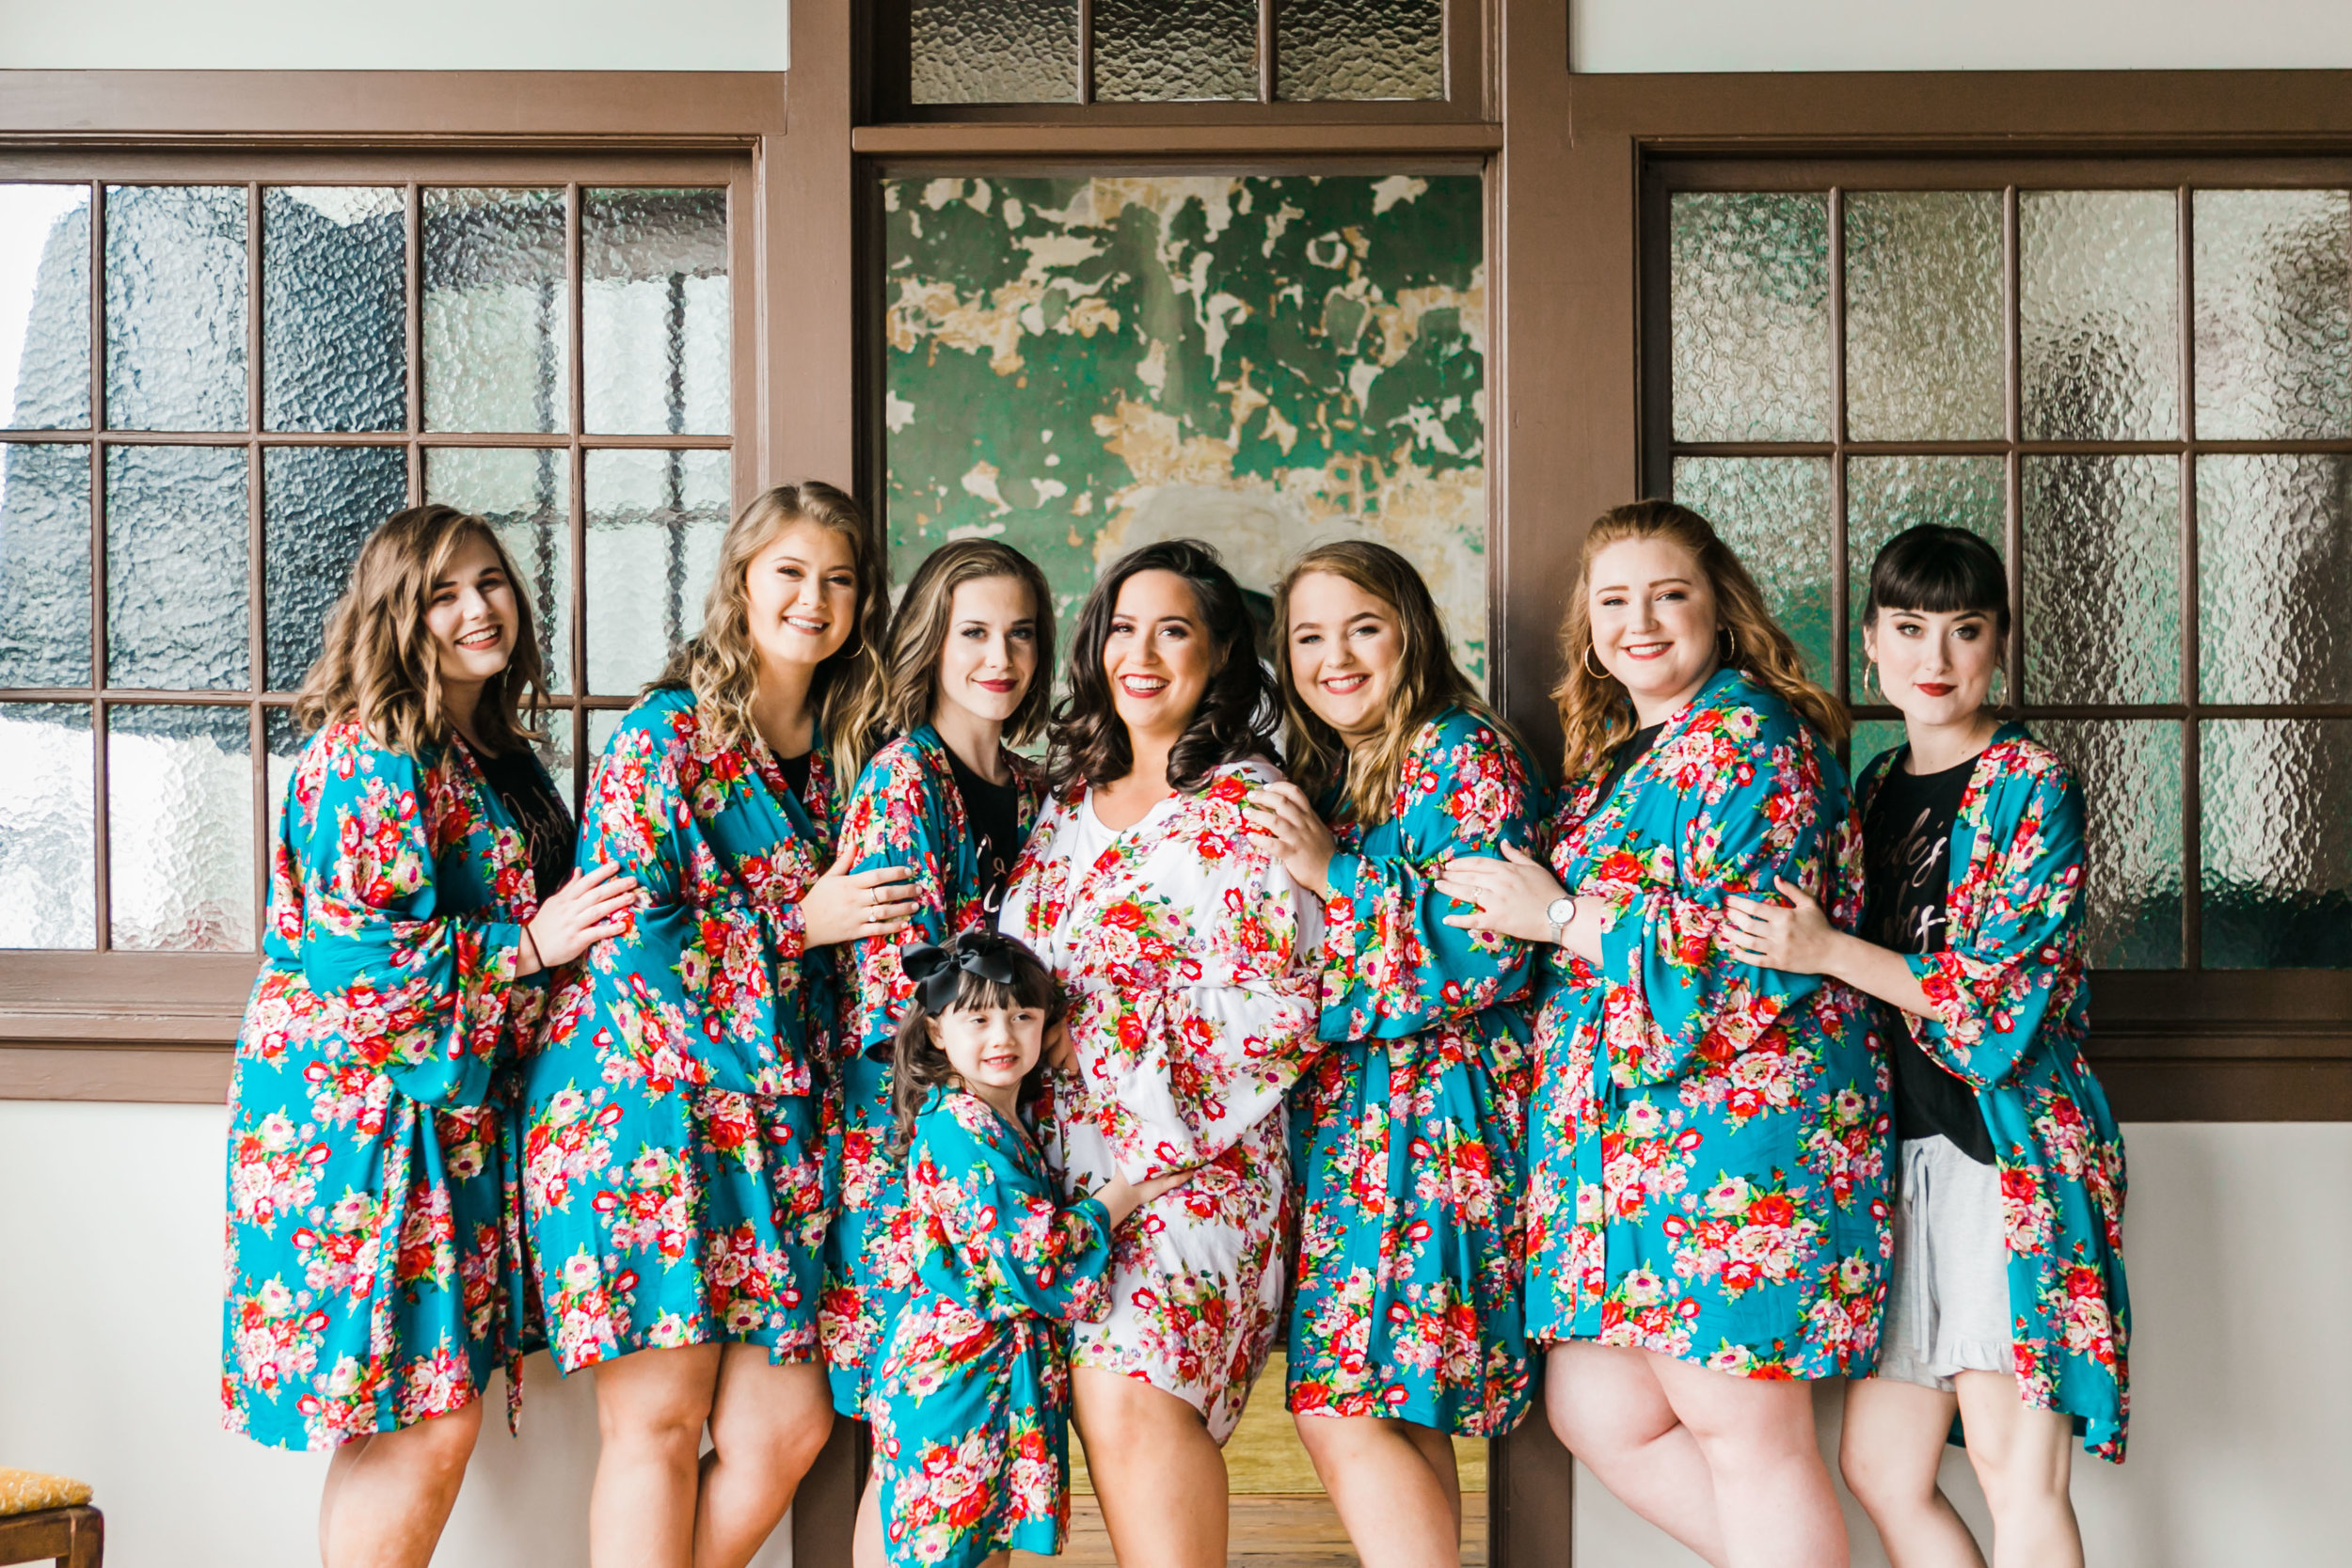 The standard knoxville bridal party